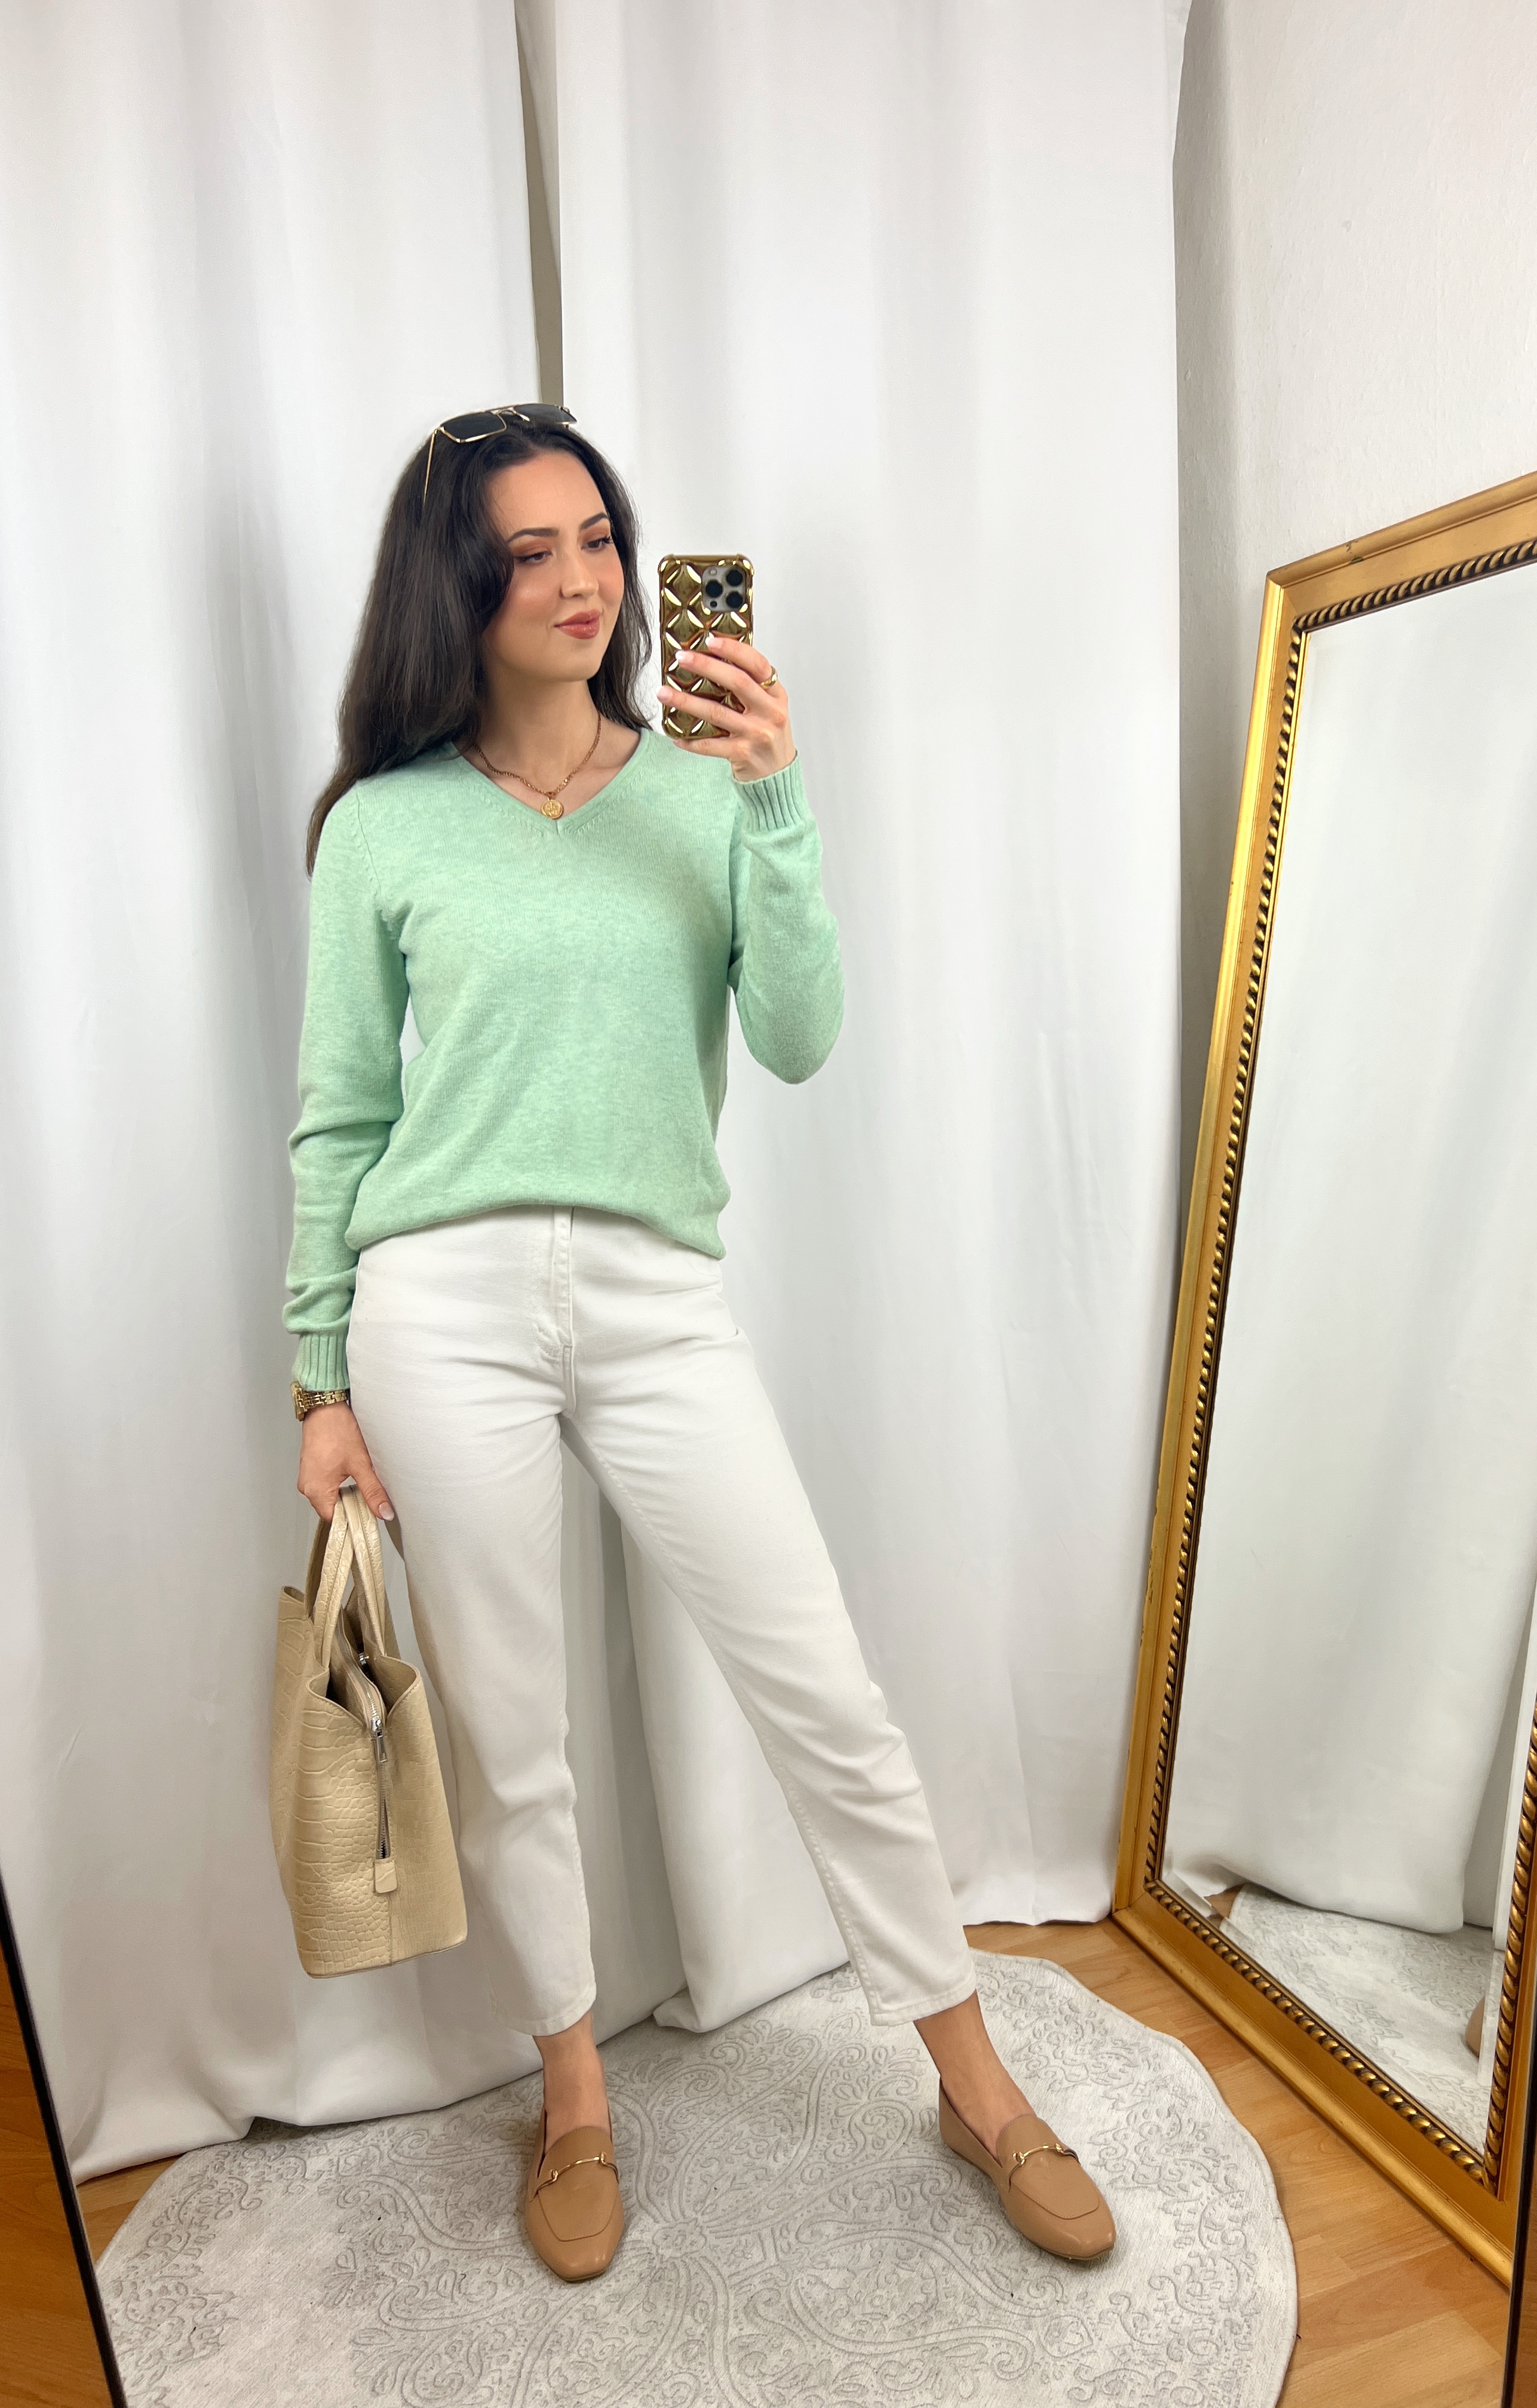 Turquiose Sweater Outfit with White Jeans